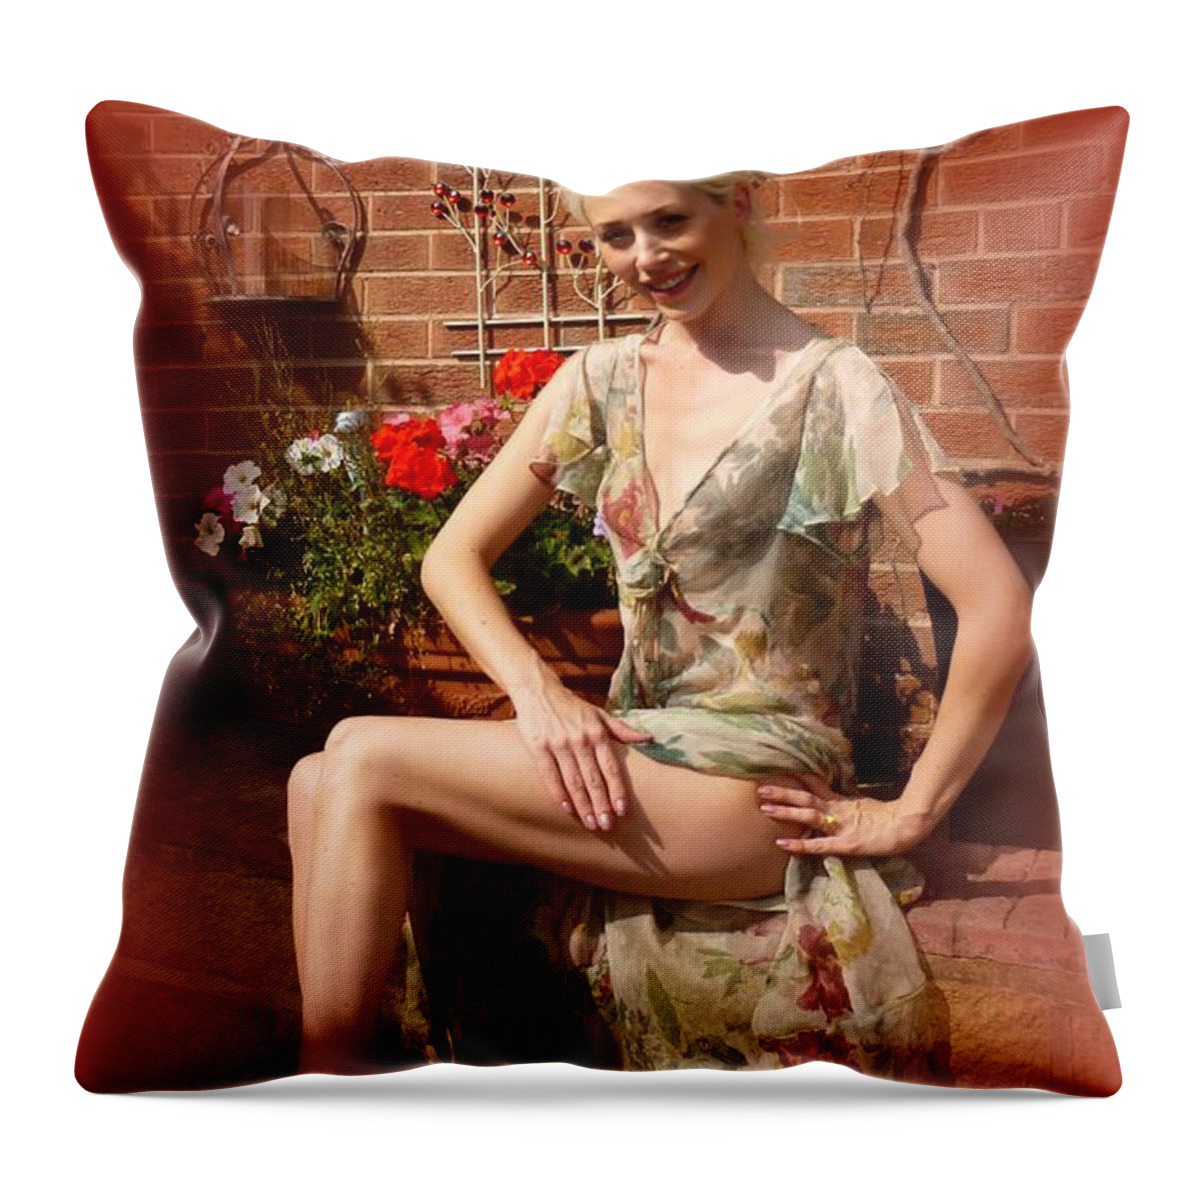  Throw Pillow featuring the photograph Autumn Shadows On Her Thigh by Asa Jones